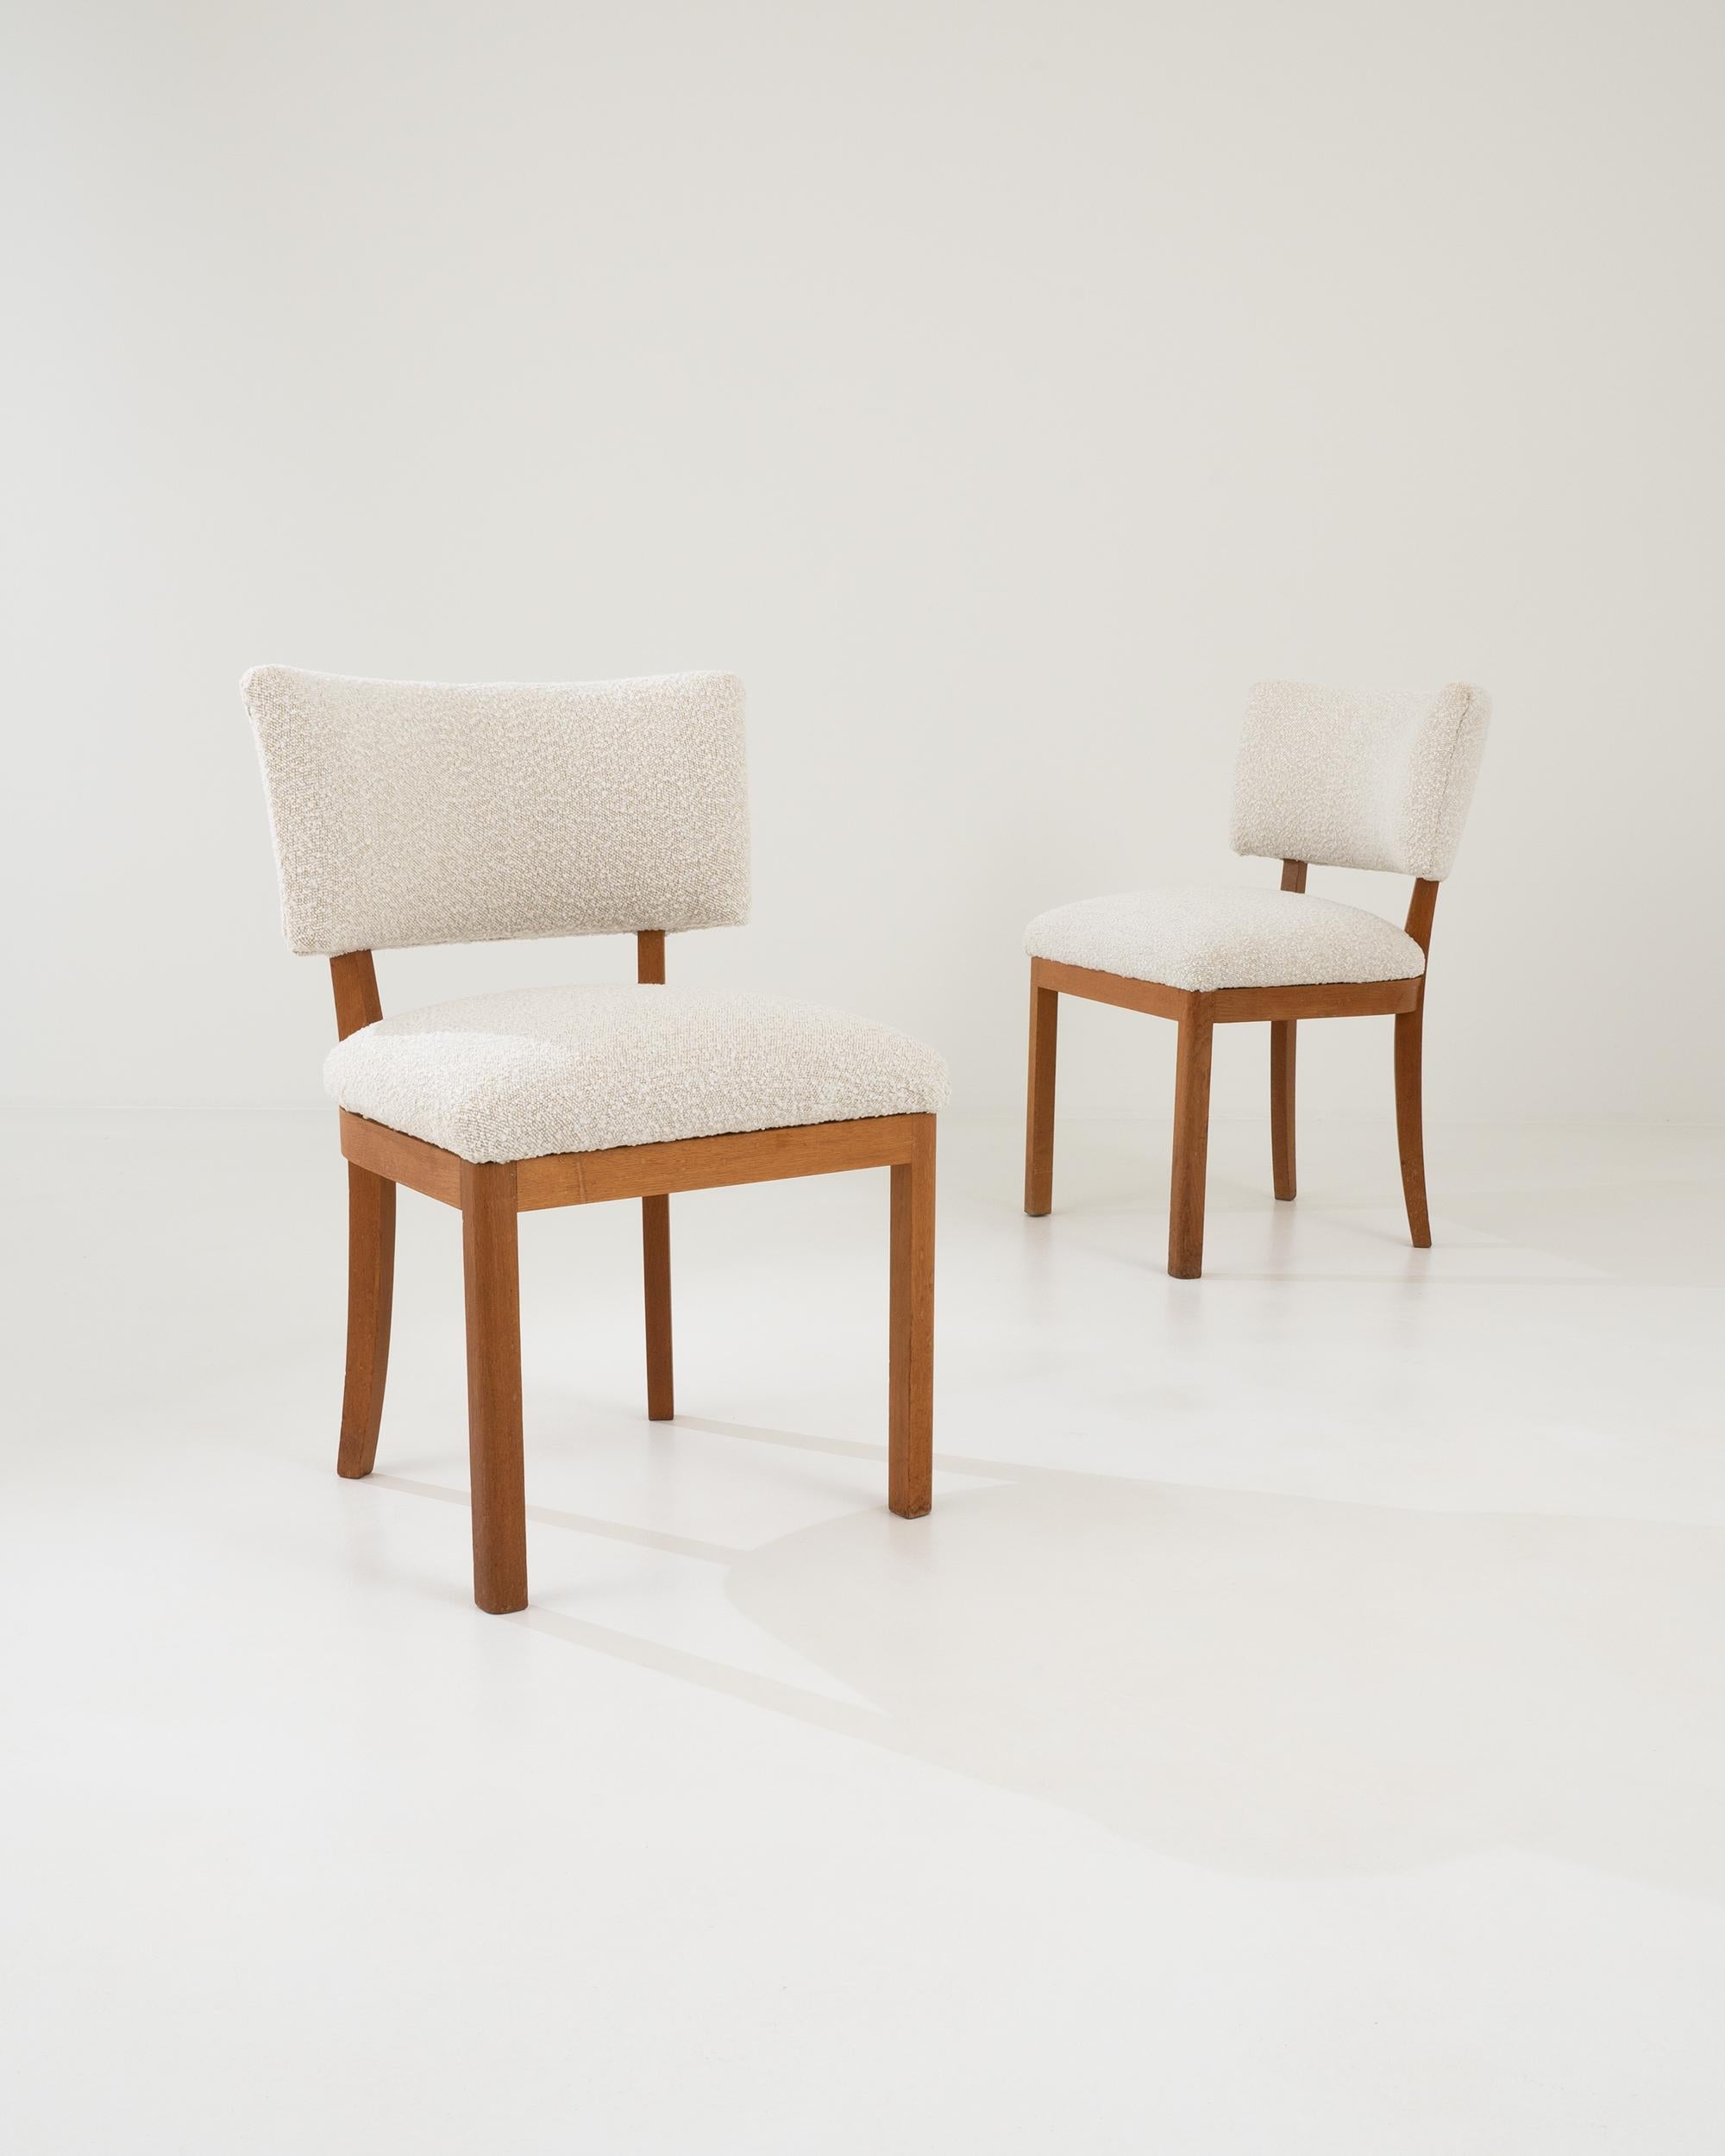 Simple yet sophisticated, this pair of vintage wooden dining chairs have a timeless appeal. Made In Czechia in the 20th century, the design combines the graphic stylishness of Midcentury Modern design with a homey straightforwardness. The hard